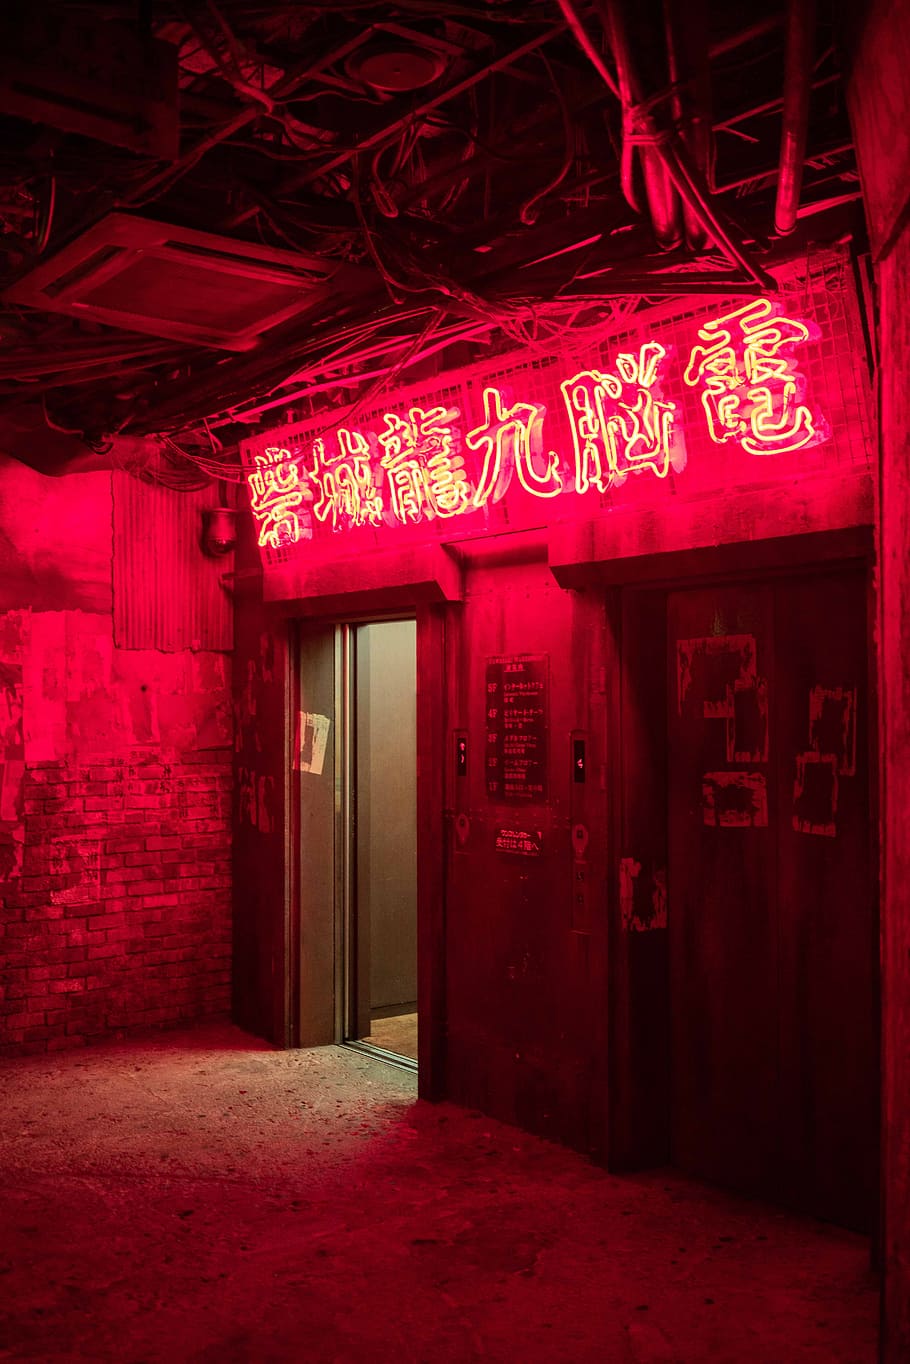 A dark room with red neon lights - Dark red, red, Cyberpunk, grunge, Tokyo, architecture, light red, pink anime, neon pink, Chinese